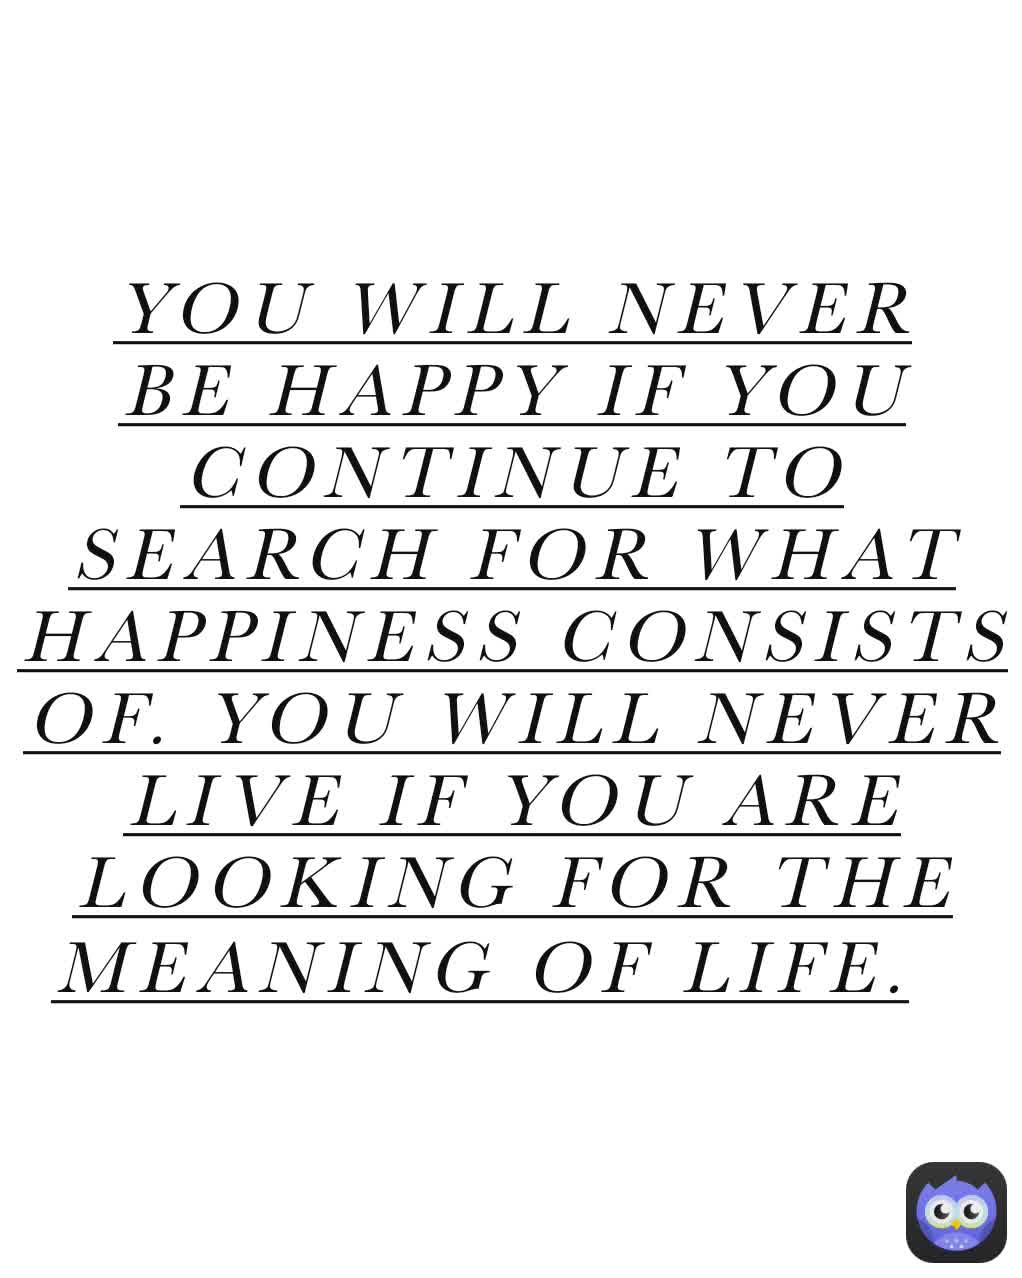 YOU WILL NEVER BE HAPPY IF YOU CONTINUE TO SEARCH FOR WHAT HAPPINESS CONSISTS OF. YOU WILL NEVER LIVE IF YOU ARE LOOKING FOR THE MEANING OF LIFE.